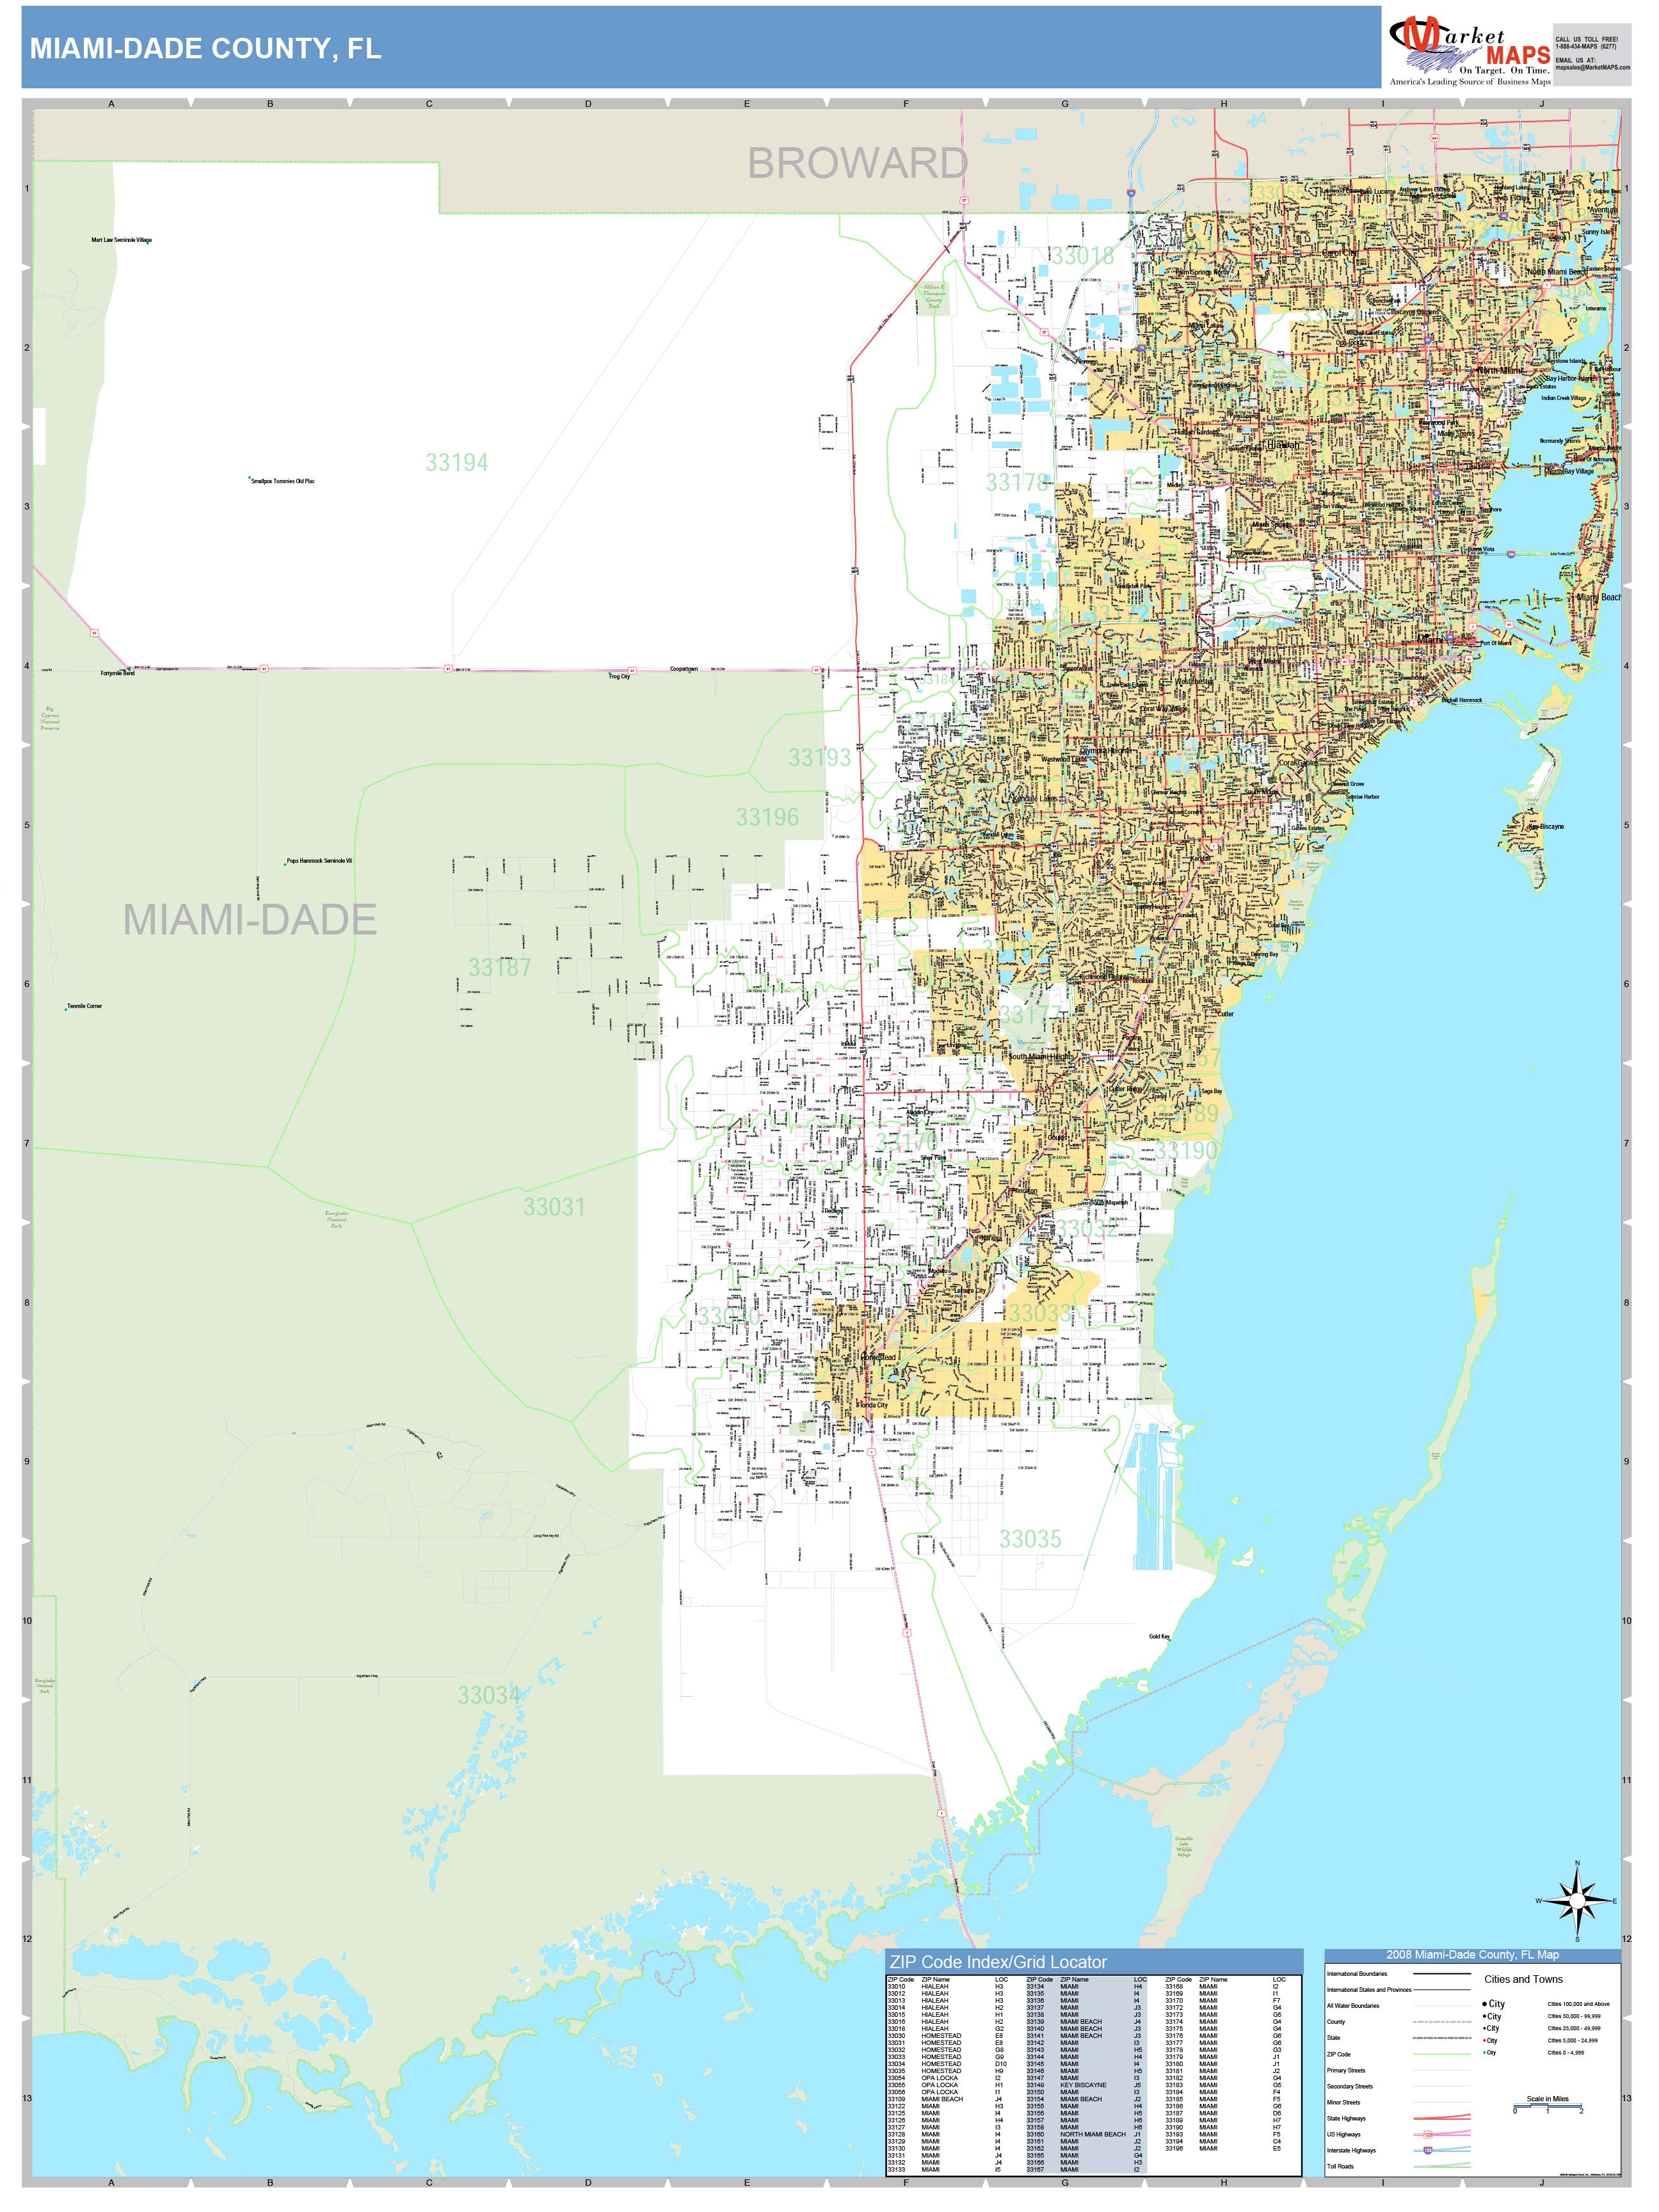 Miami-Dade County, FL Zip Code Wall Map Basic Style by MarketMAPS